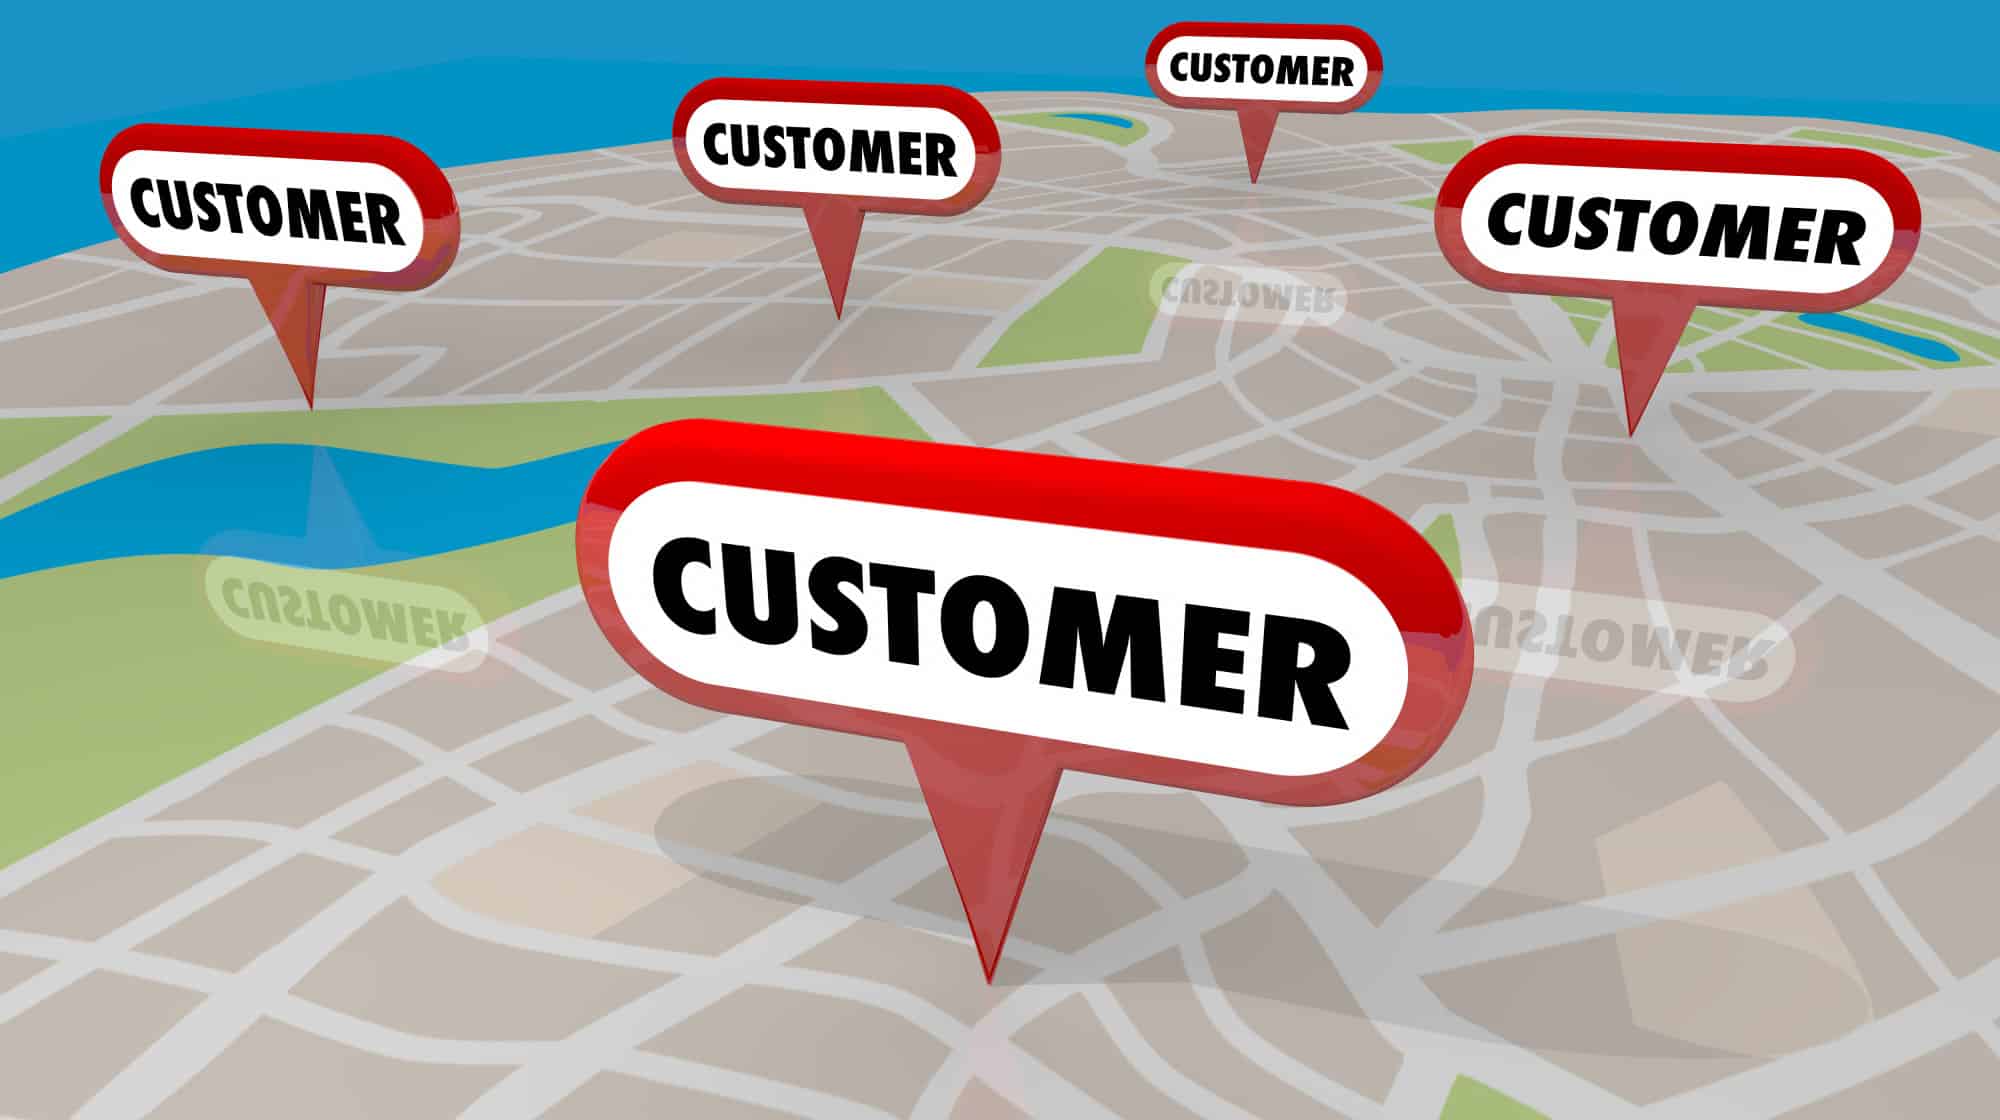 10 Effective Ways FL Businesses Find Customers and Make More Sales